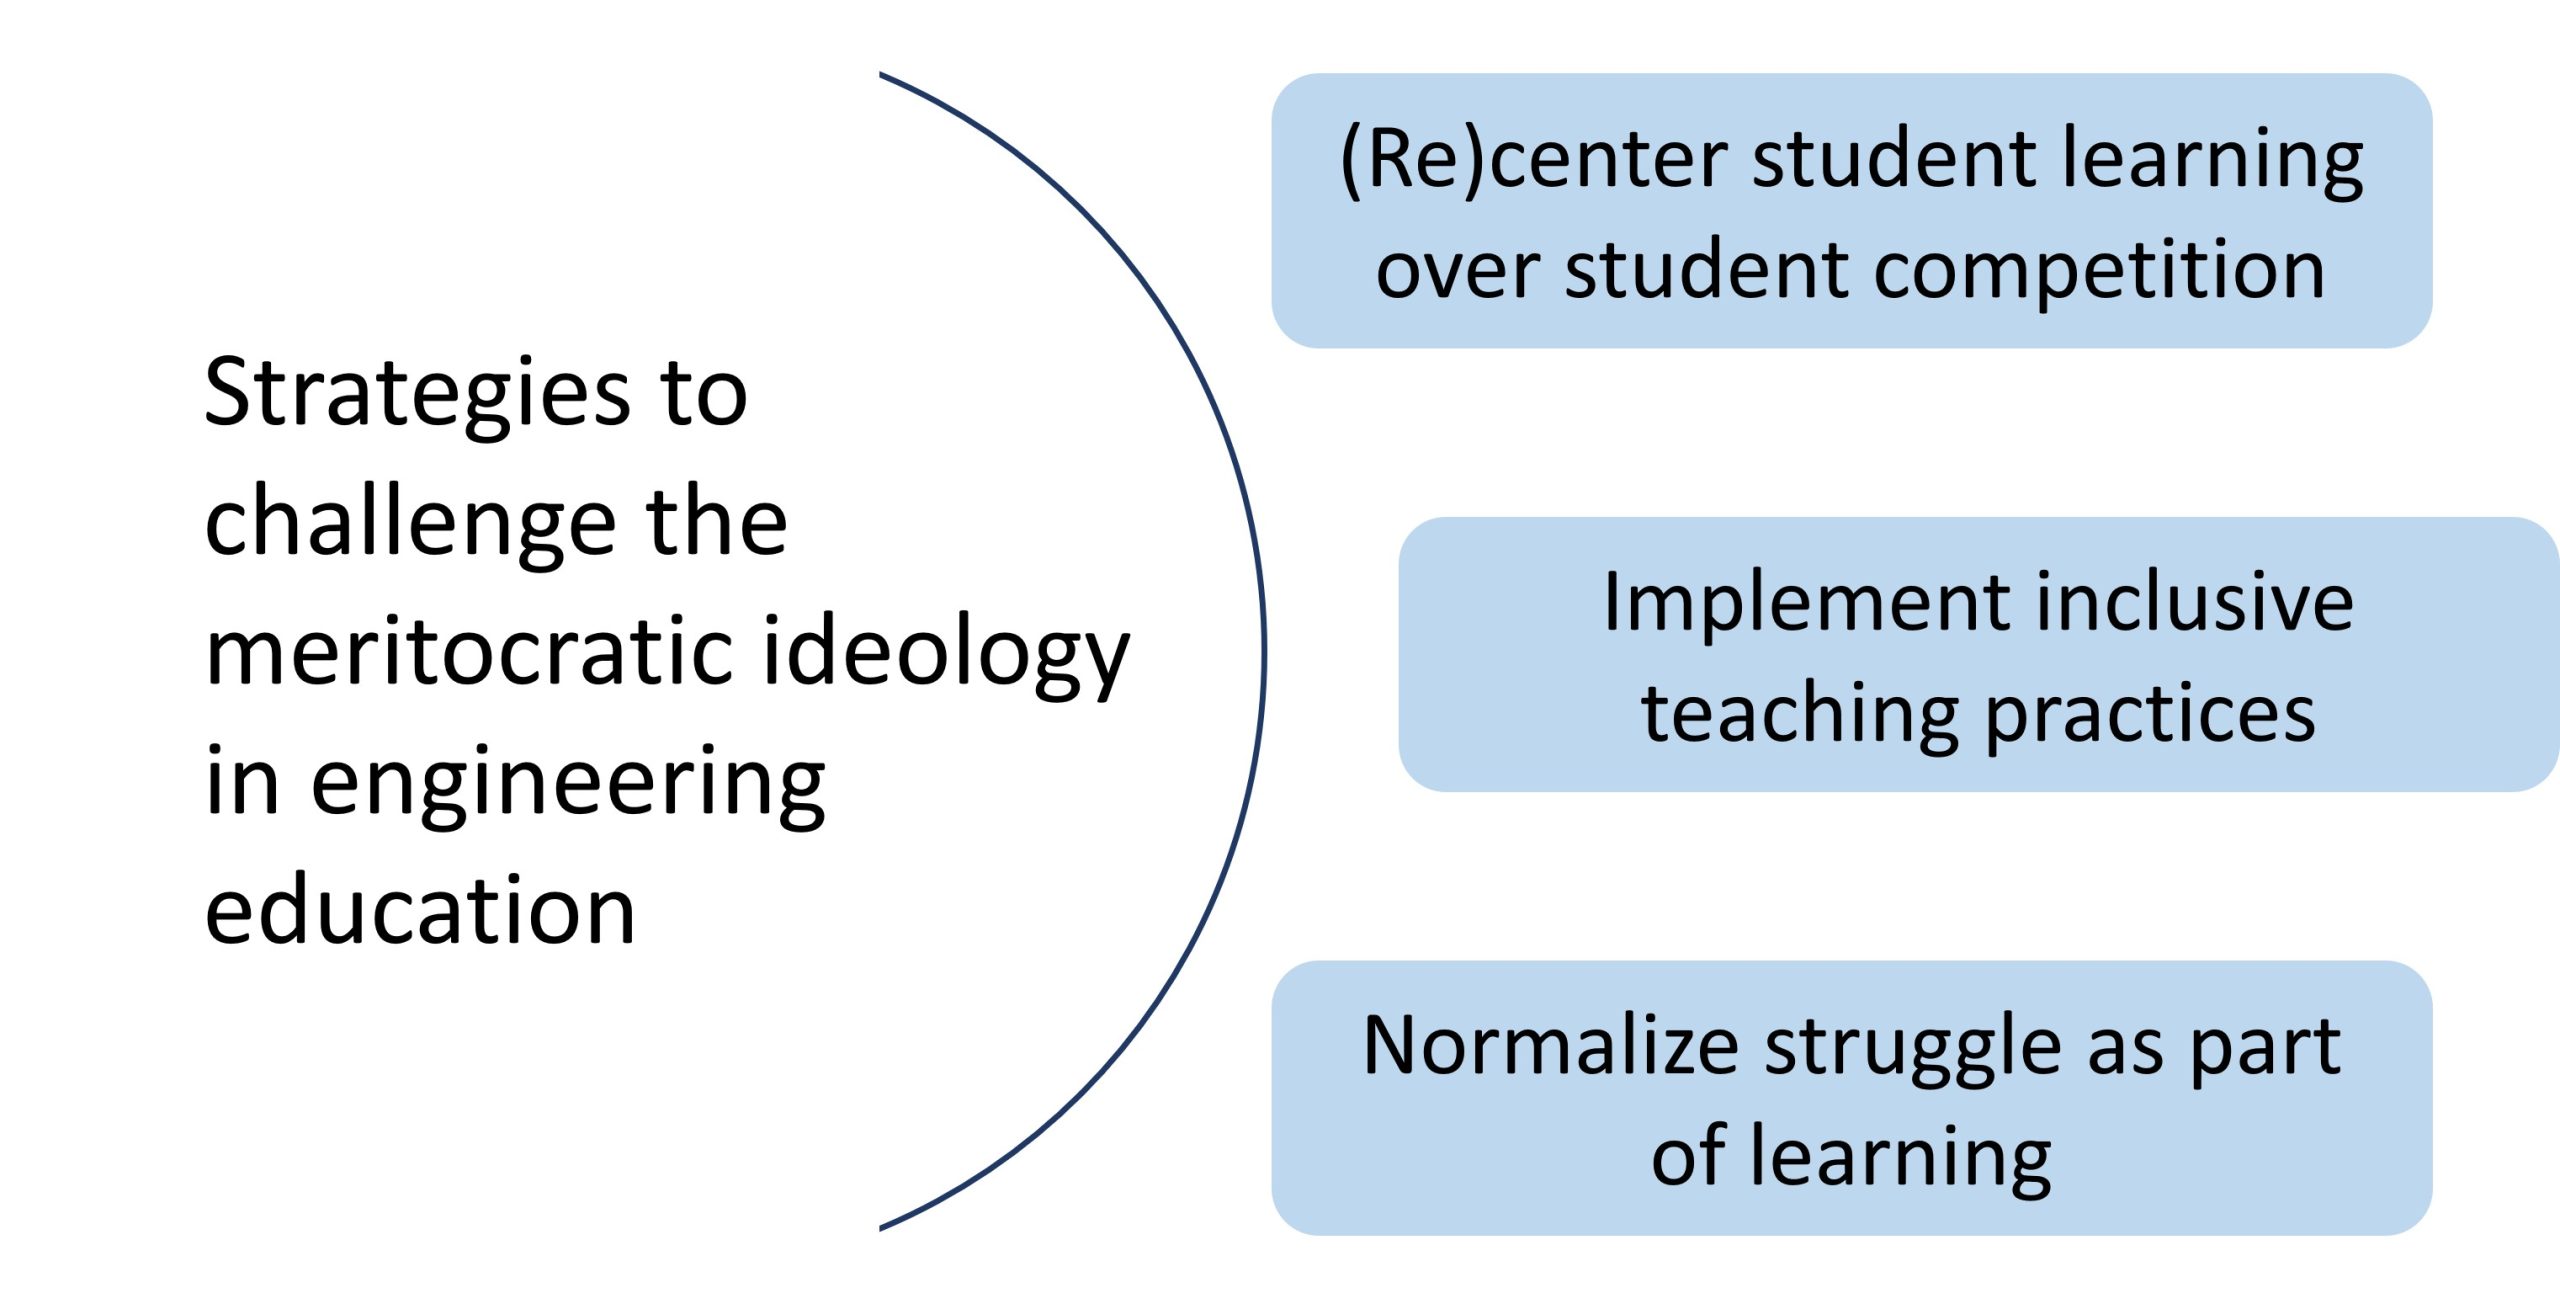 Strategies to challenge the meritocratic ideology in engineering education (Re)center student learning over student competition Implement inclusive teaching practices Normalize struggle as part of learning